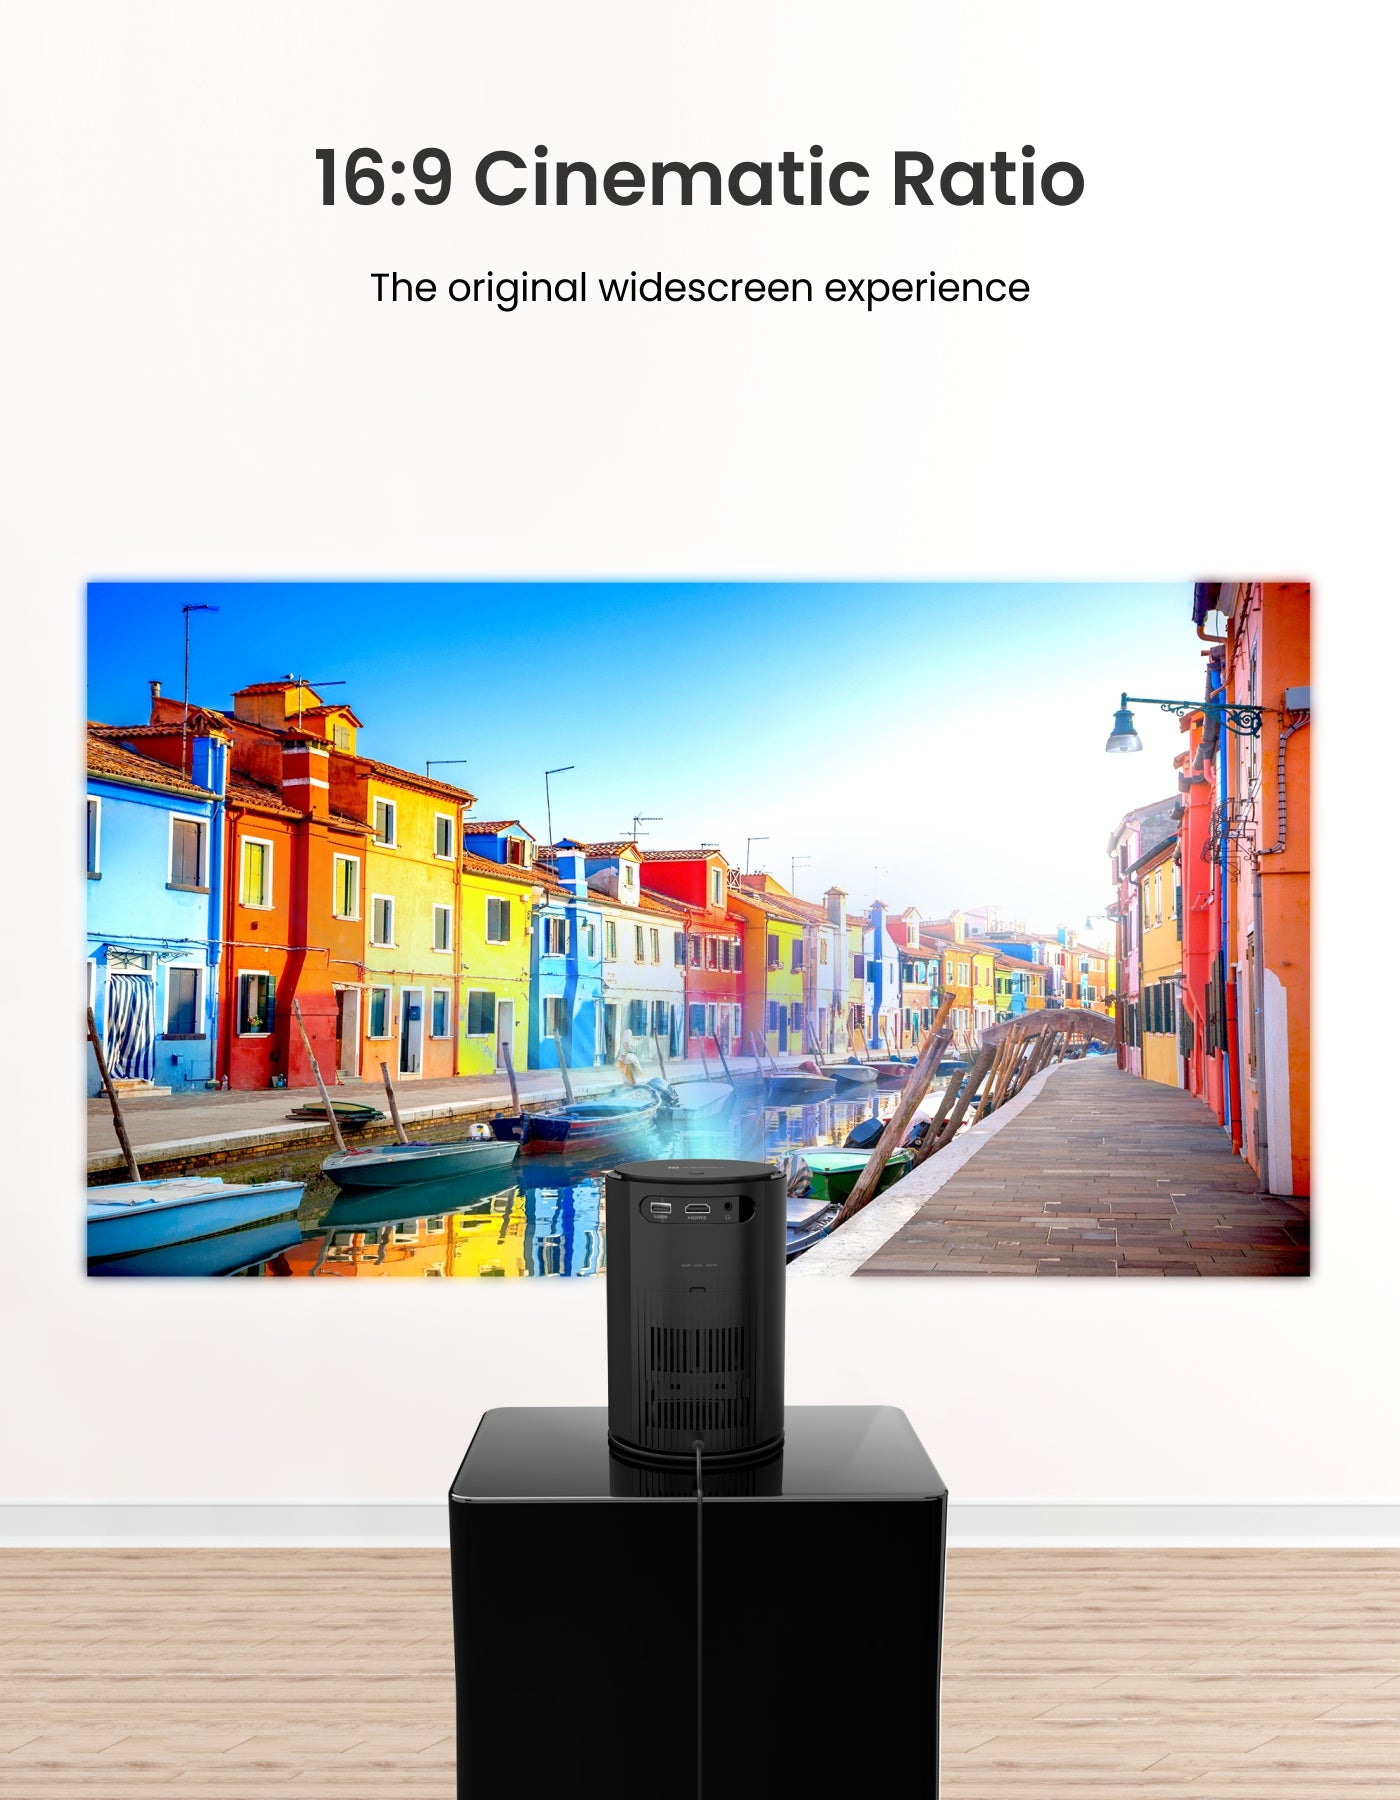 Portronics Beem 400 smart mini led projector| Portable projector for home with 16:9 cinematic ratio